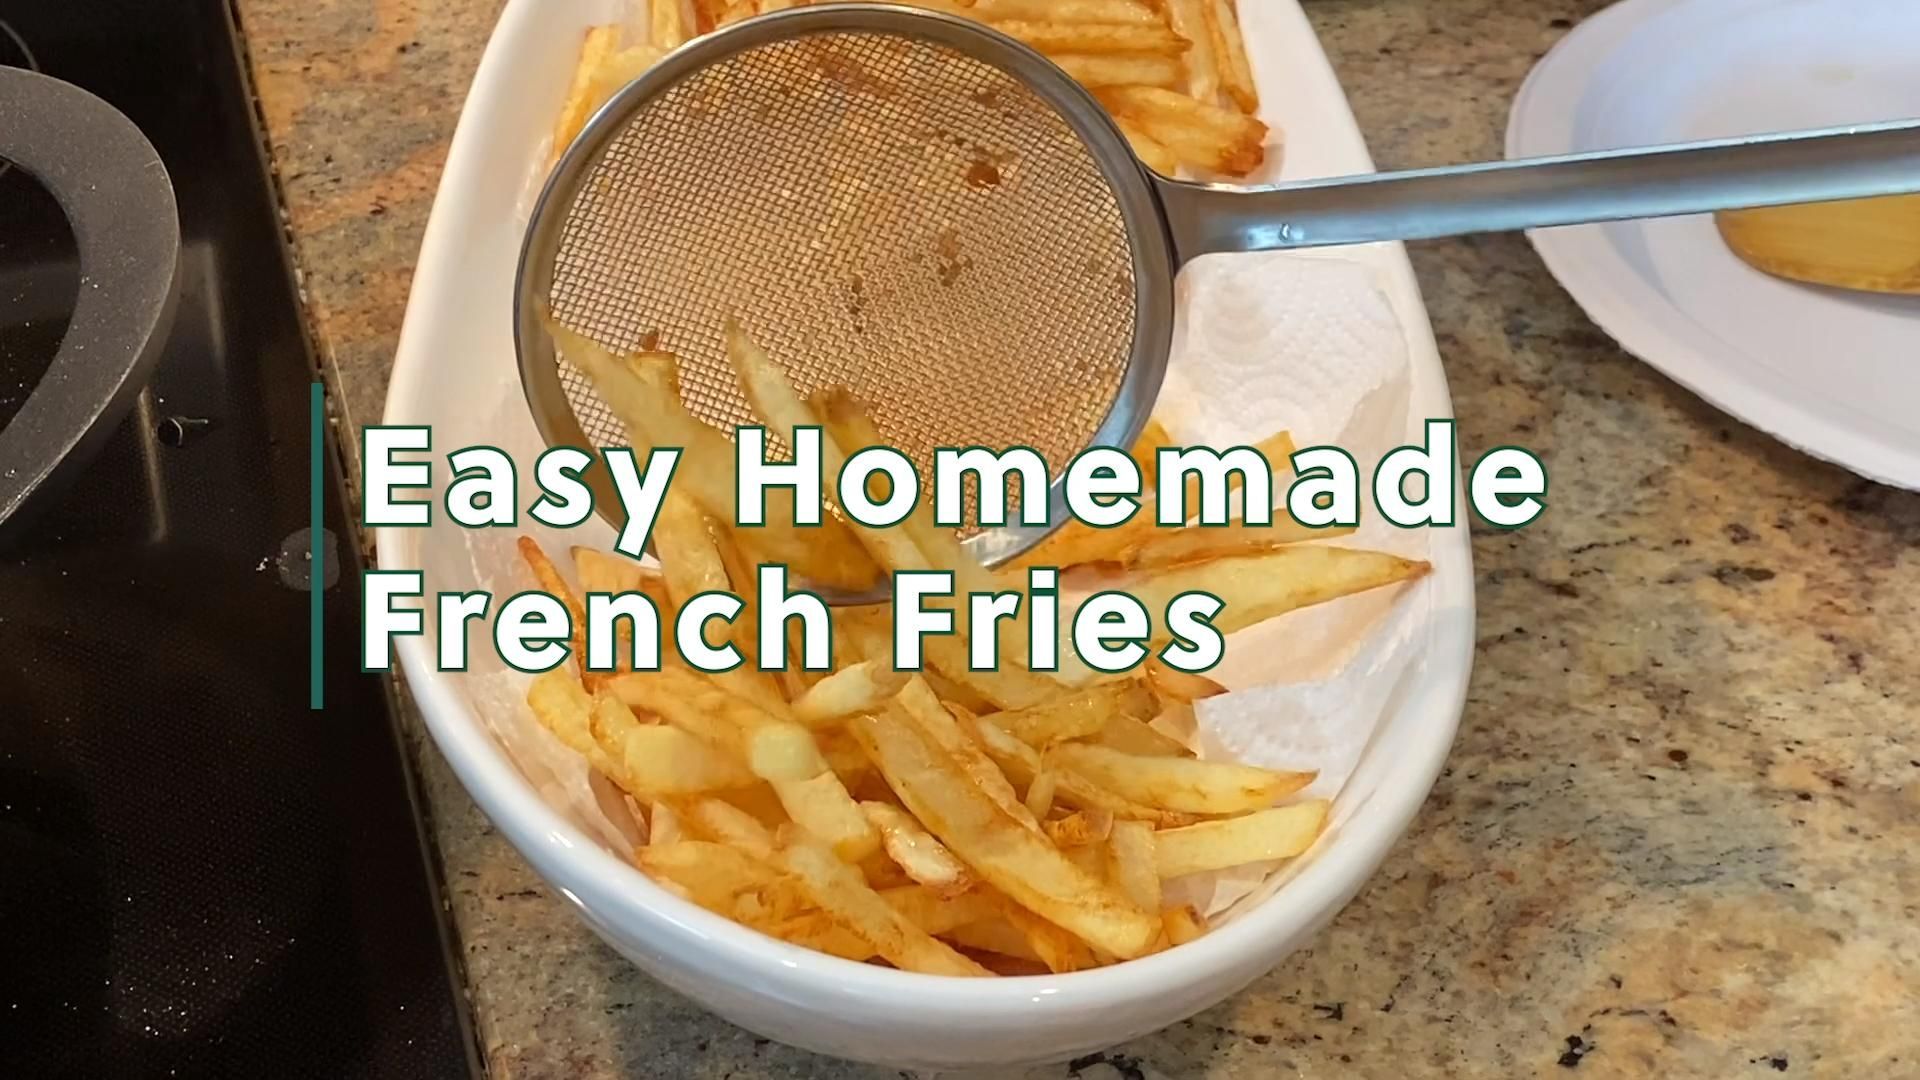 Easy Homemade French Fries -   diy Food fast